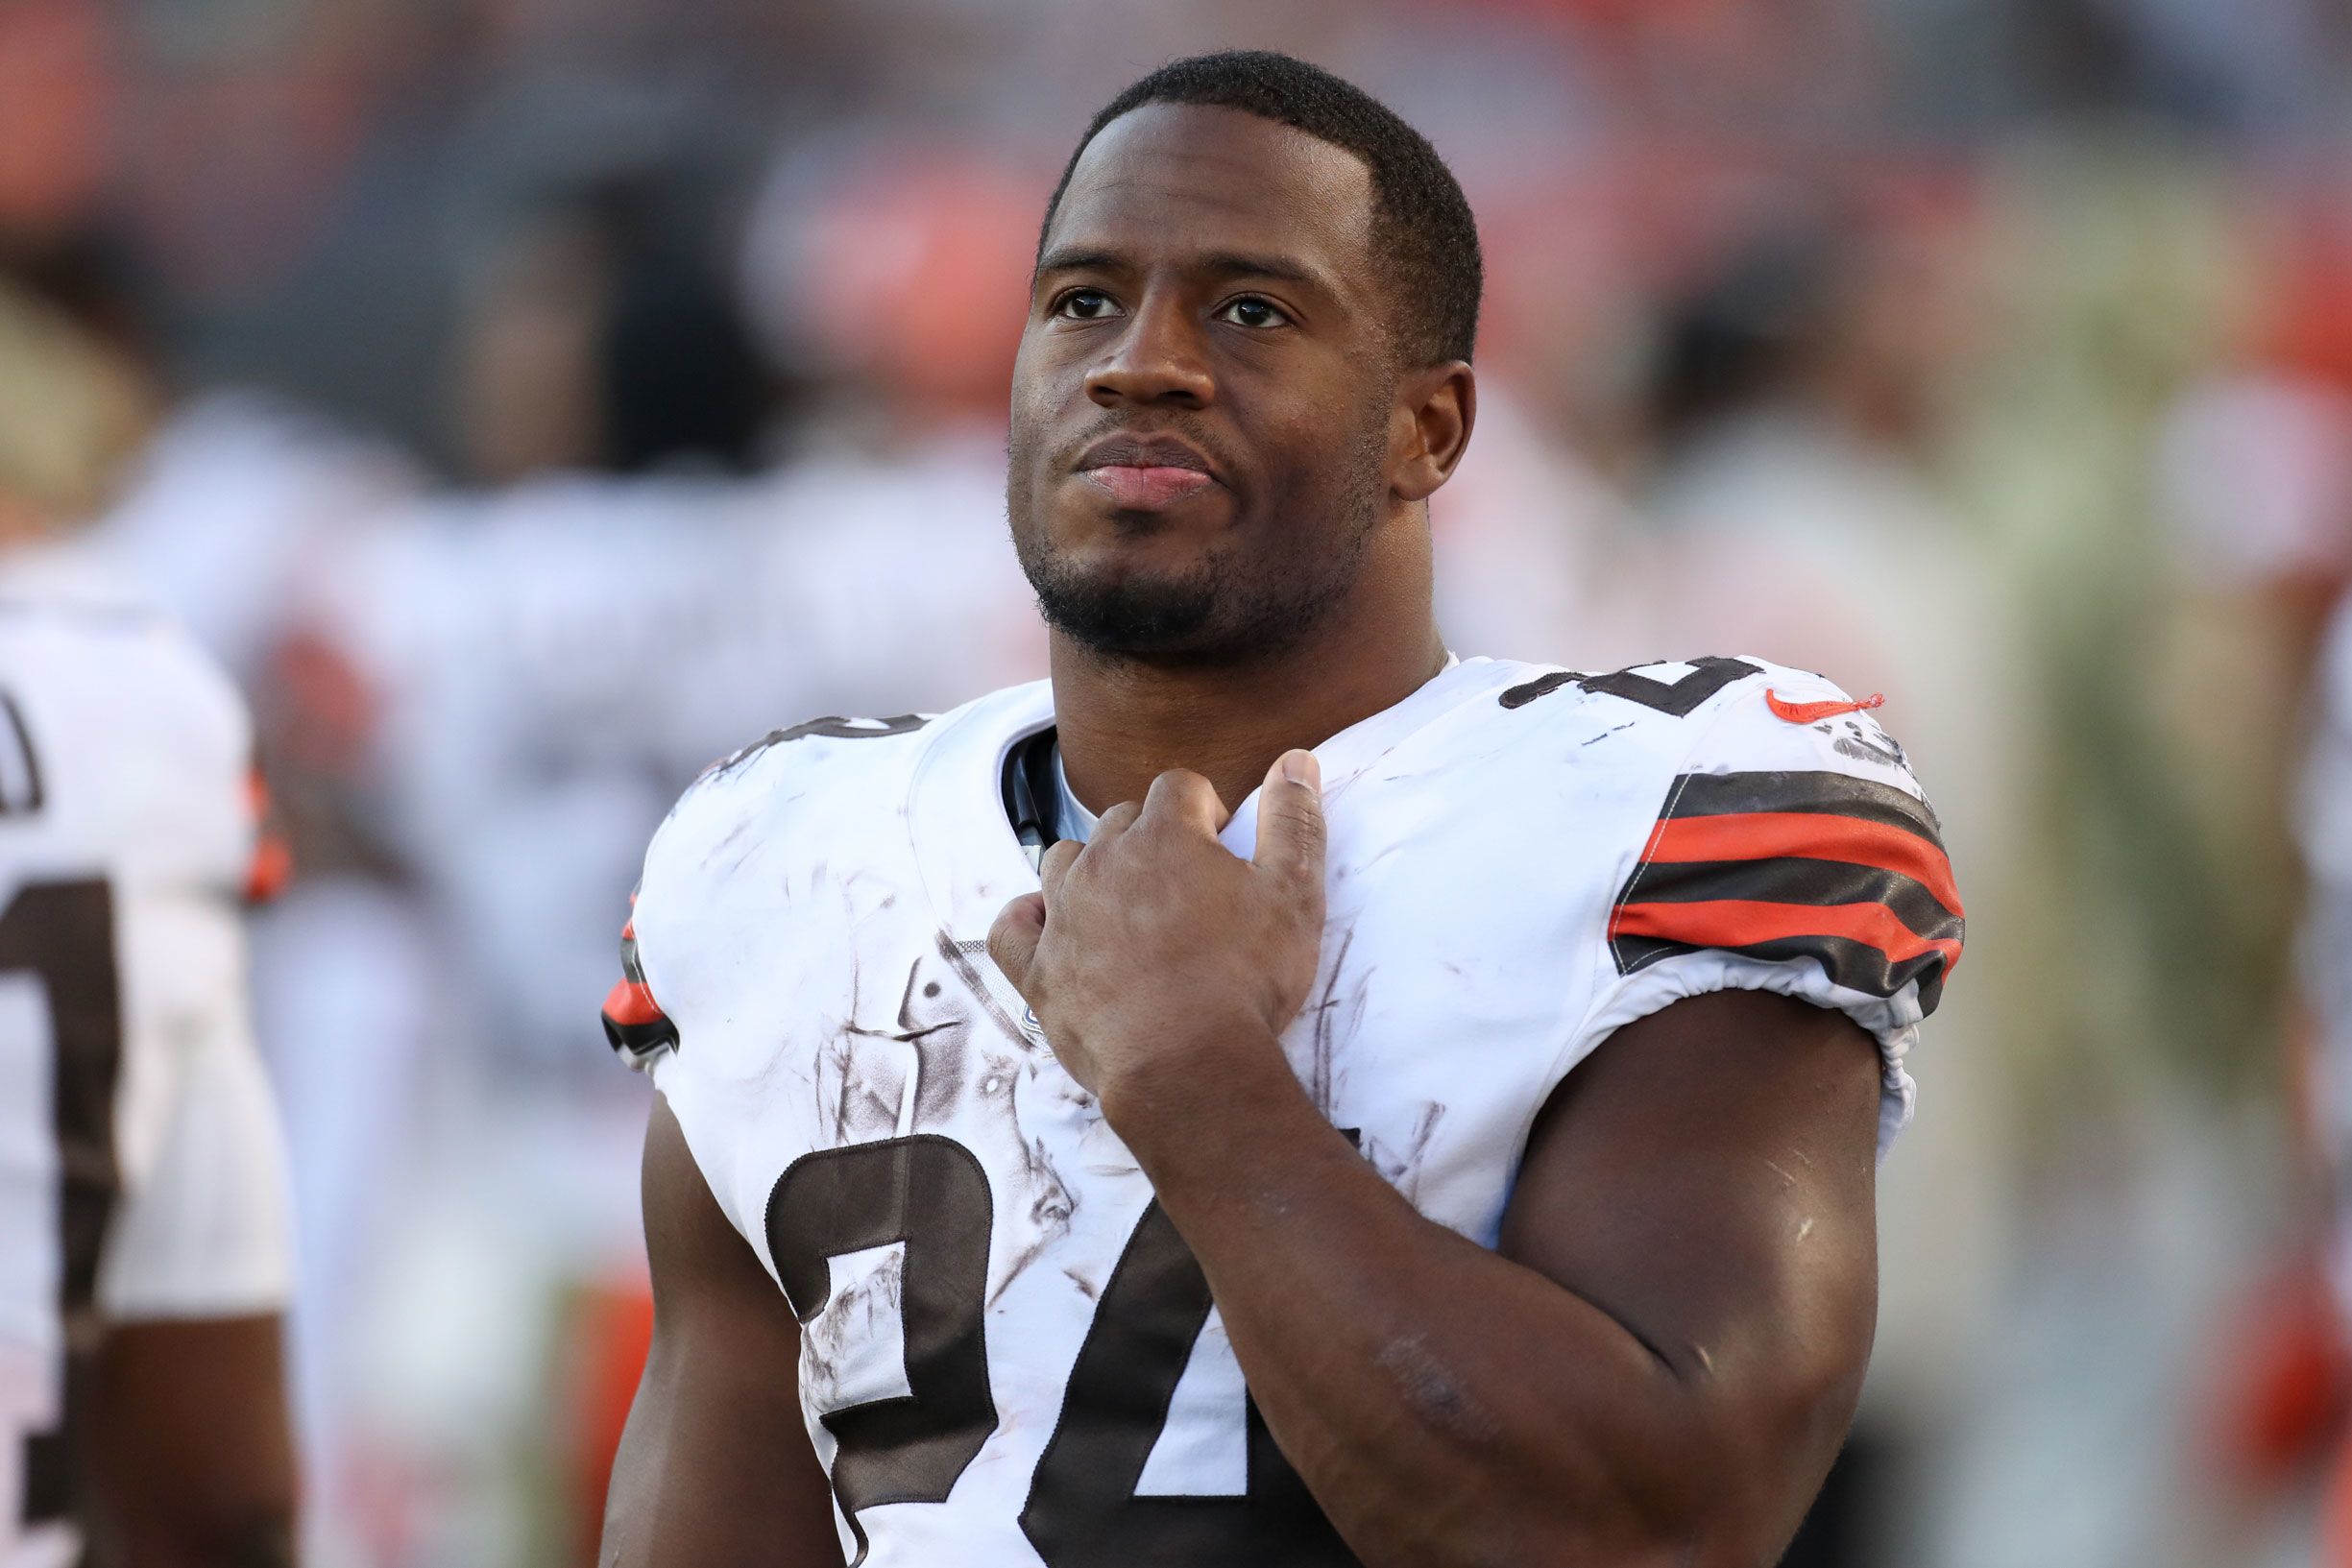 Cleveland Browns: Star Nick Chubb and two other running backs out